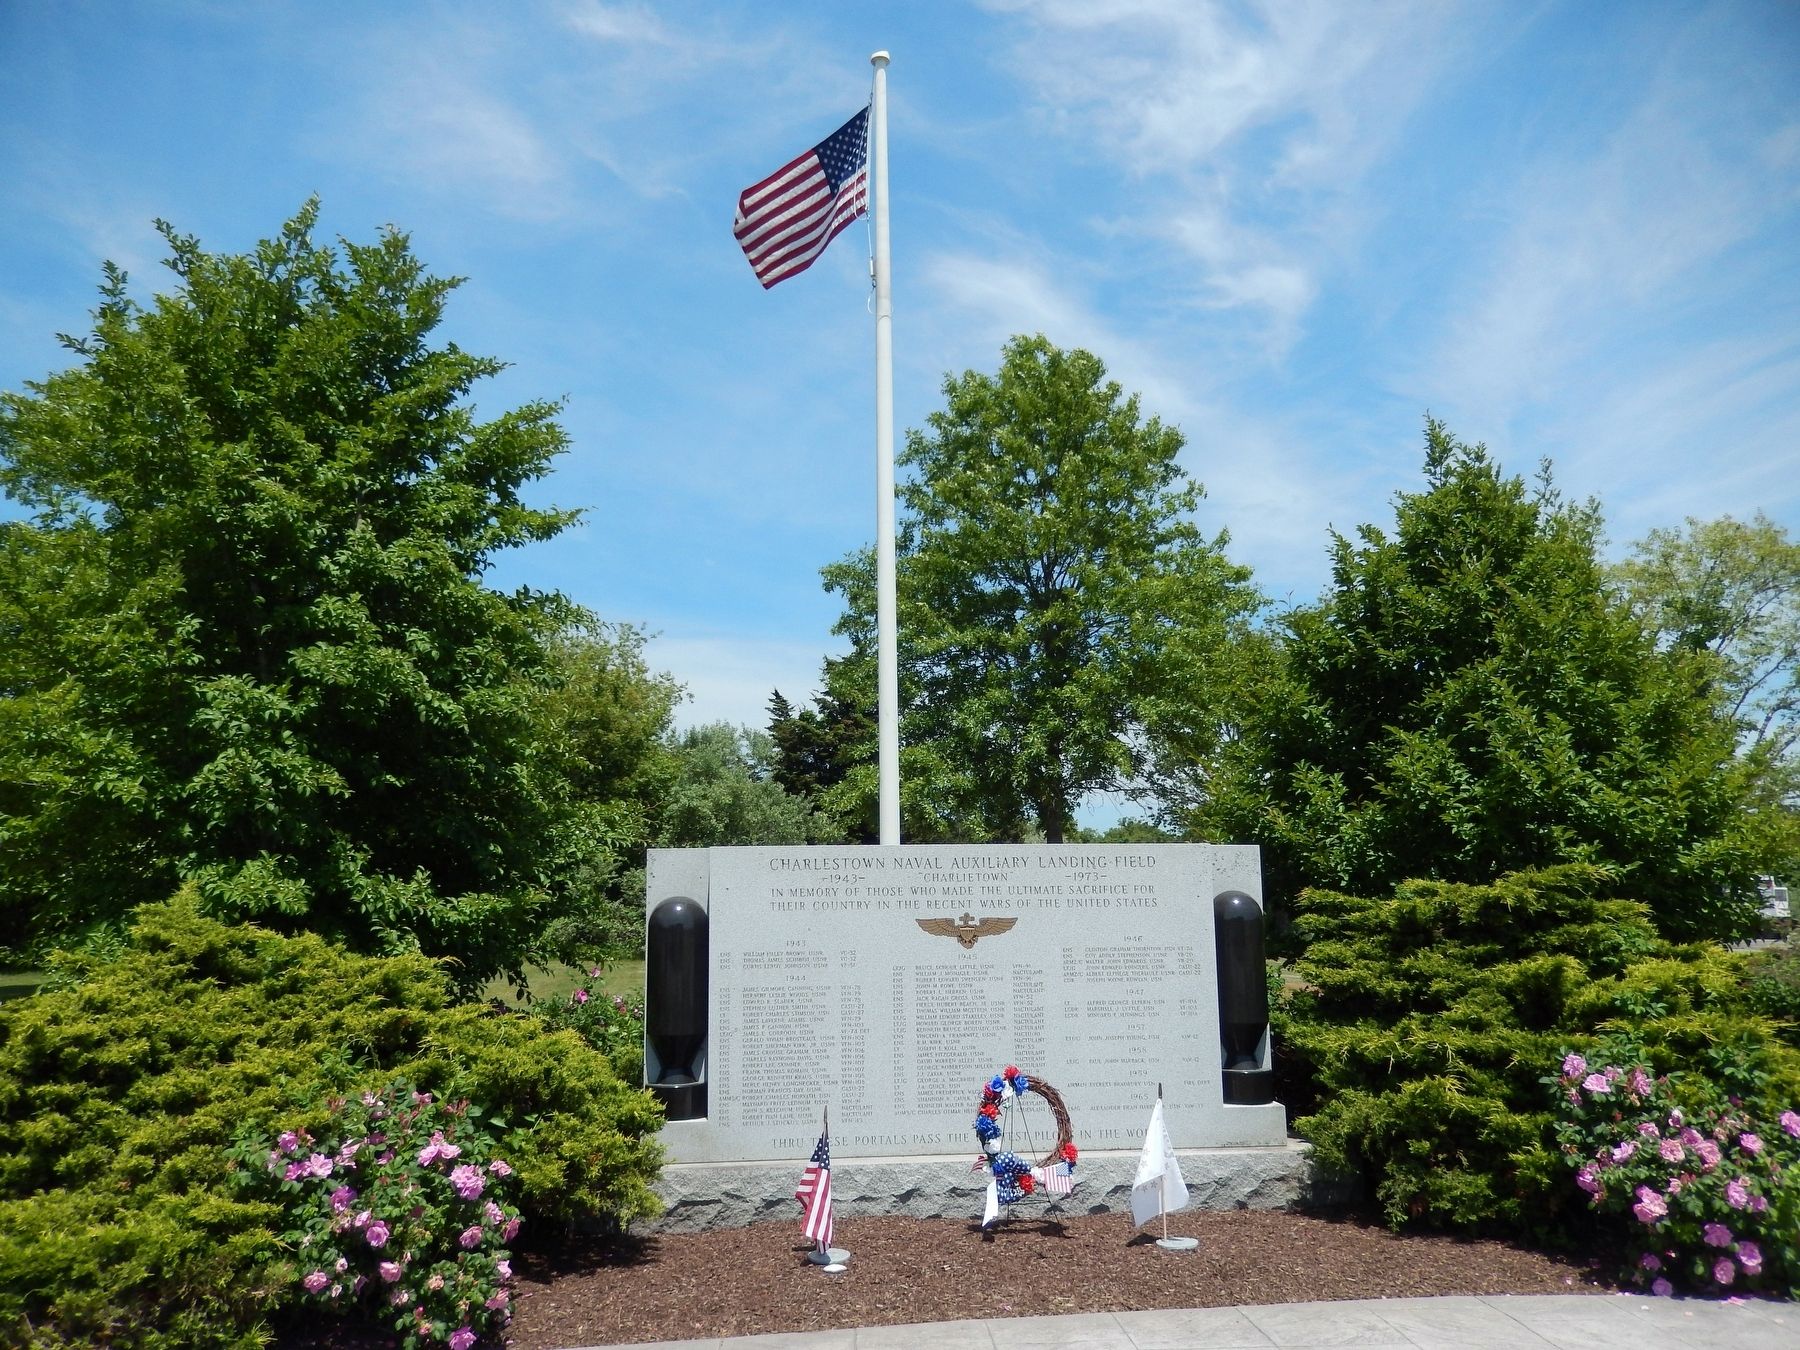 Charlestown Naval Auxiliary Landing Field Memorial (<i>wide view</i>) image. Click for full size.